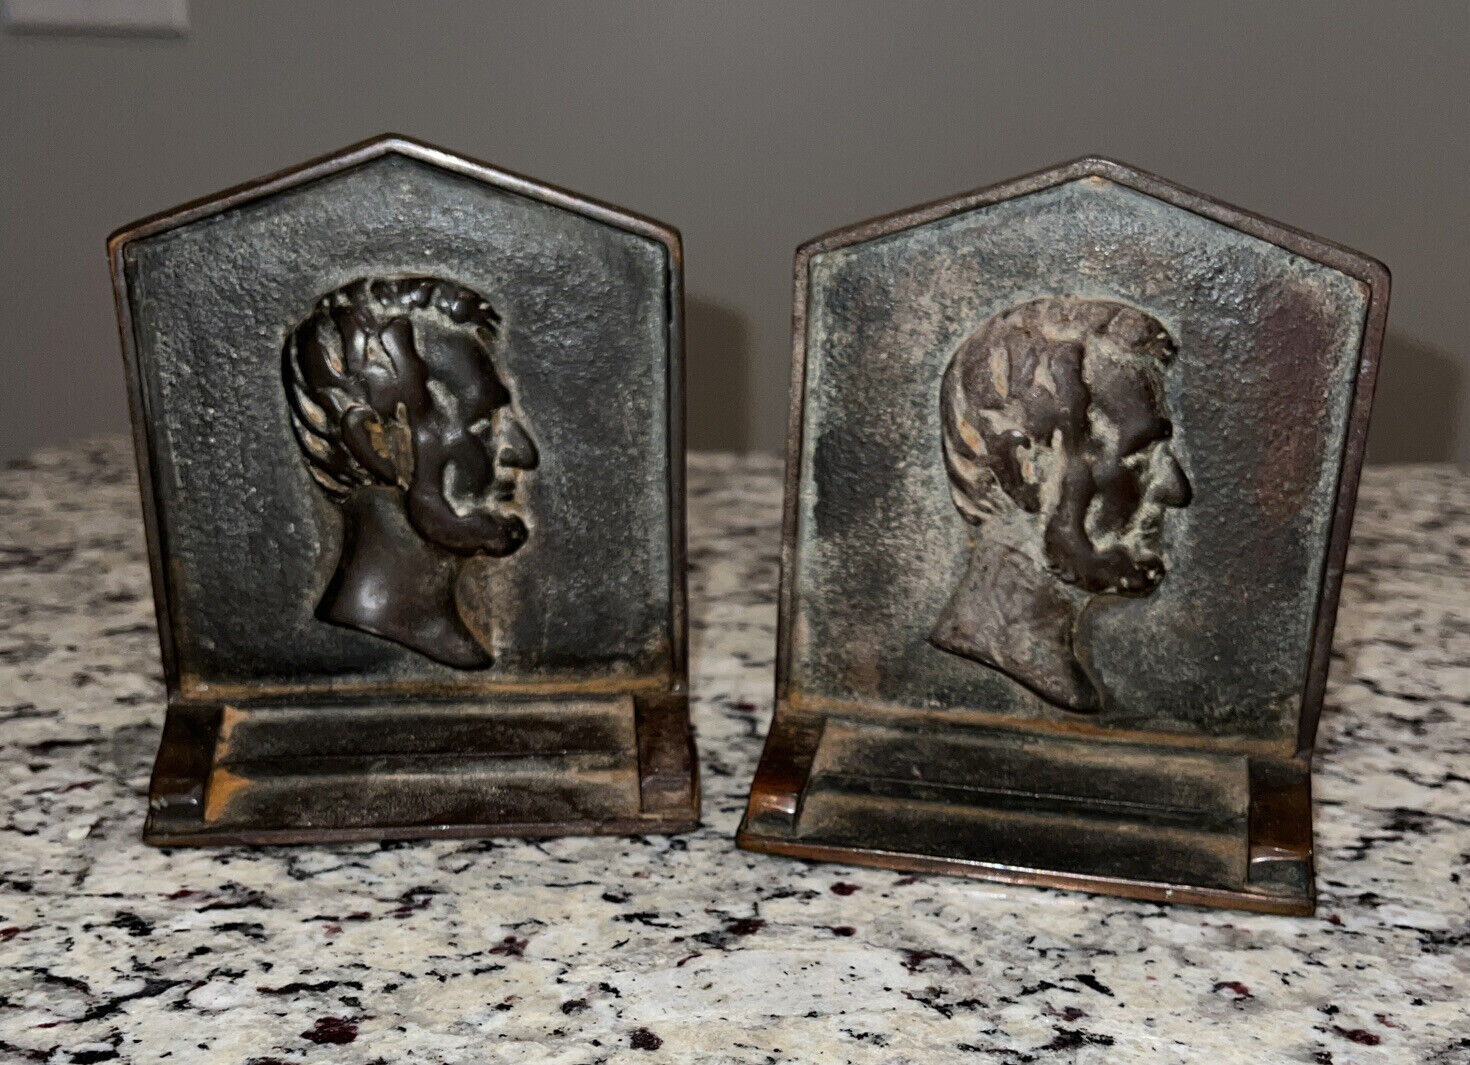 Vintage - Mini Abraham Lincoln Metal Bookends Patina Bronze(?), Brass(?)